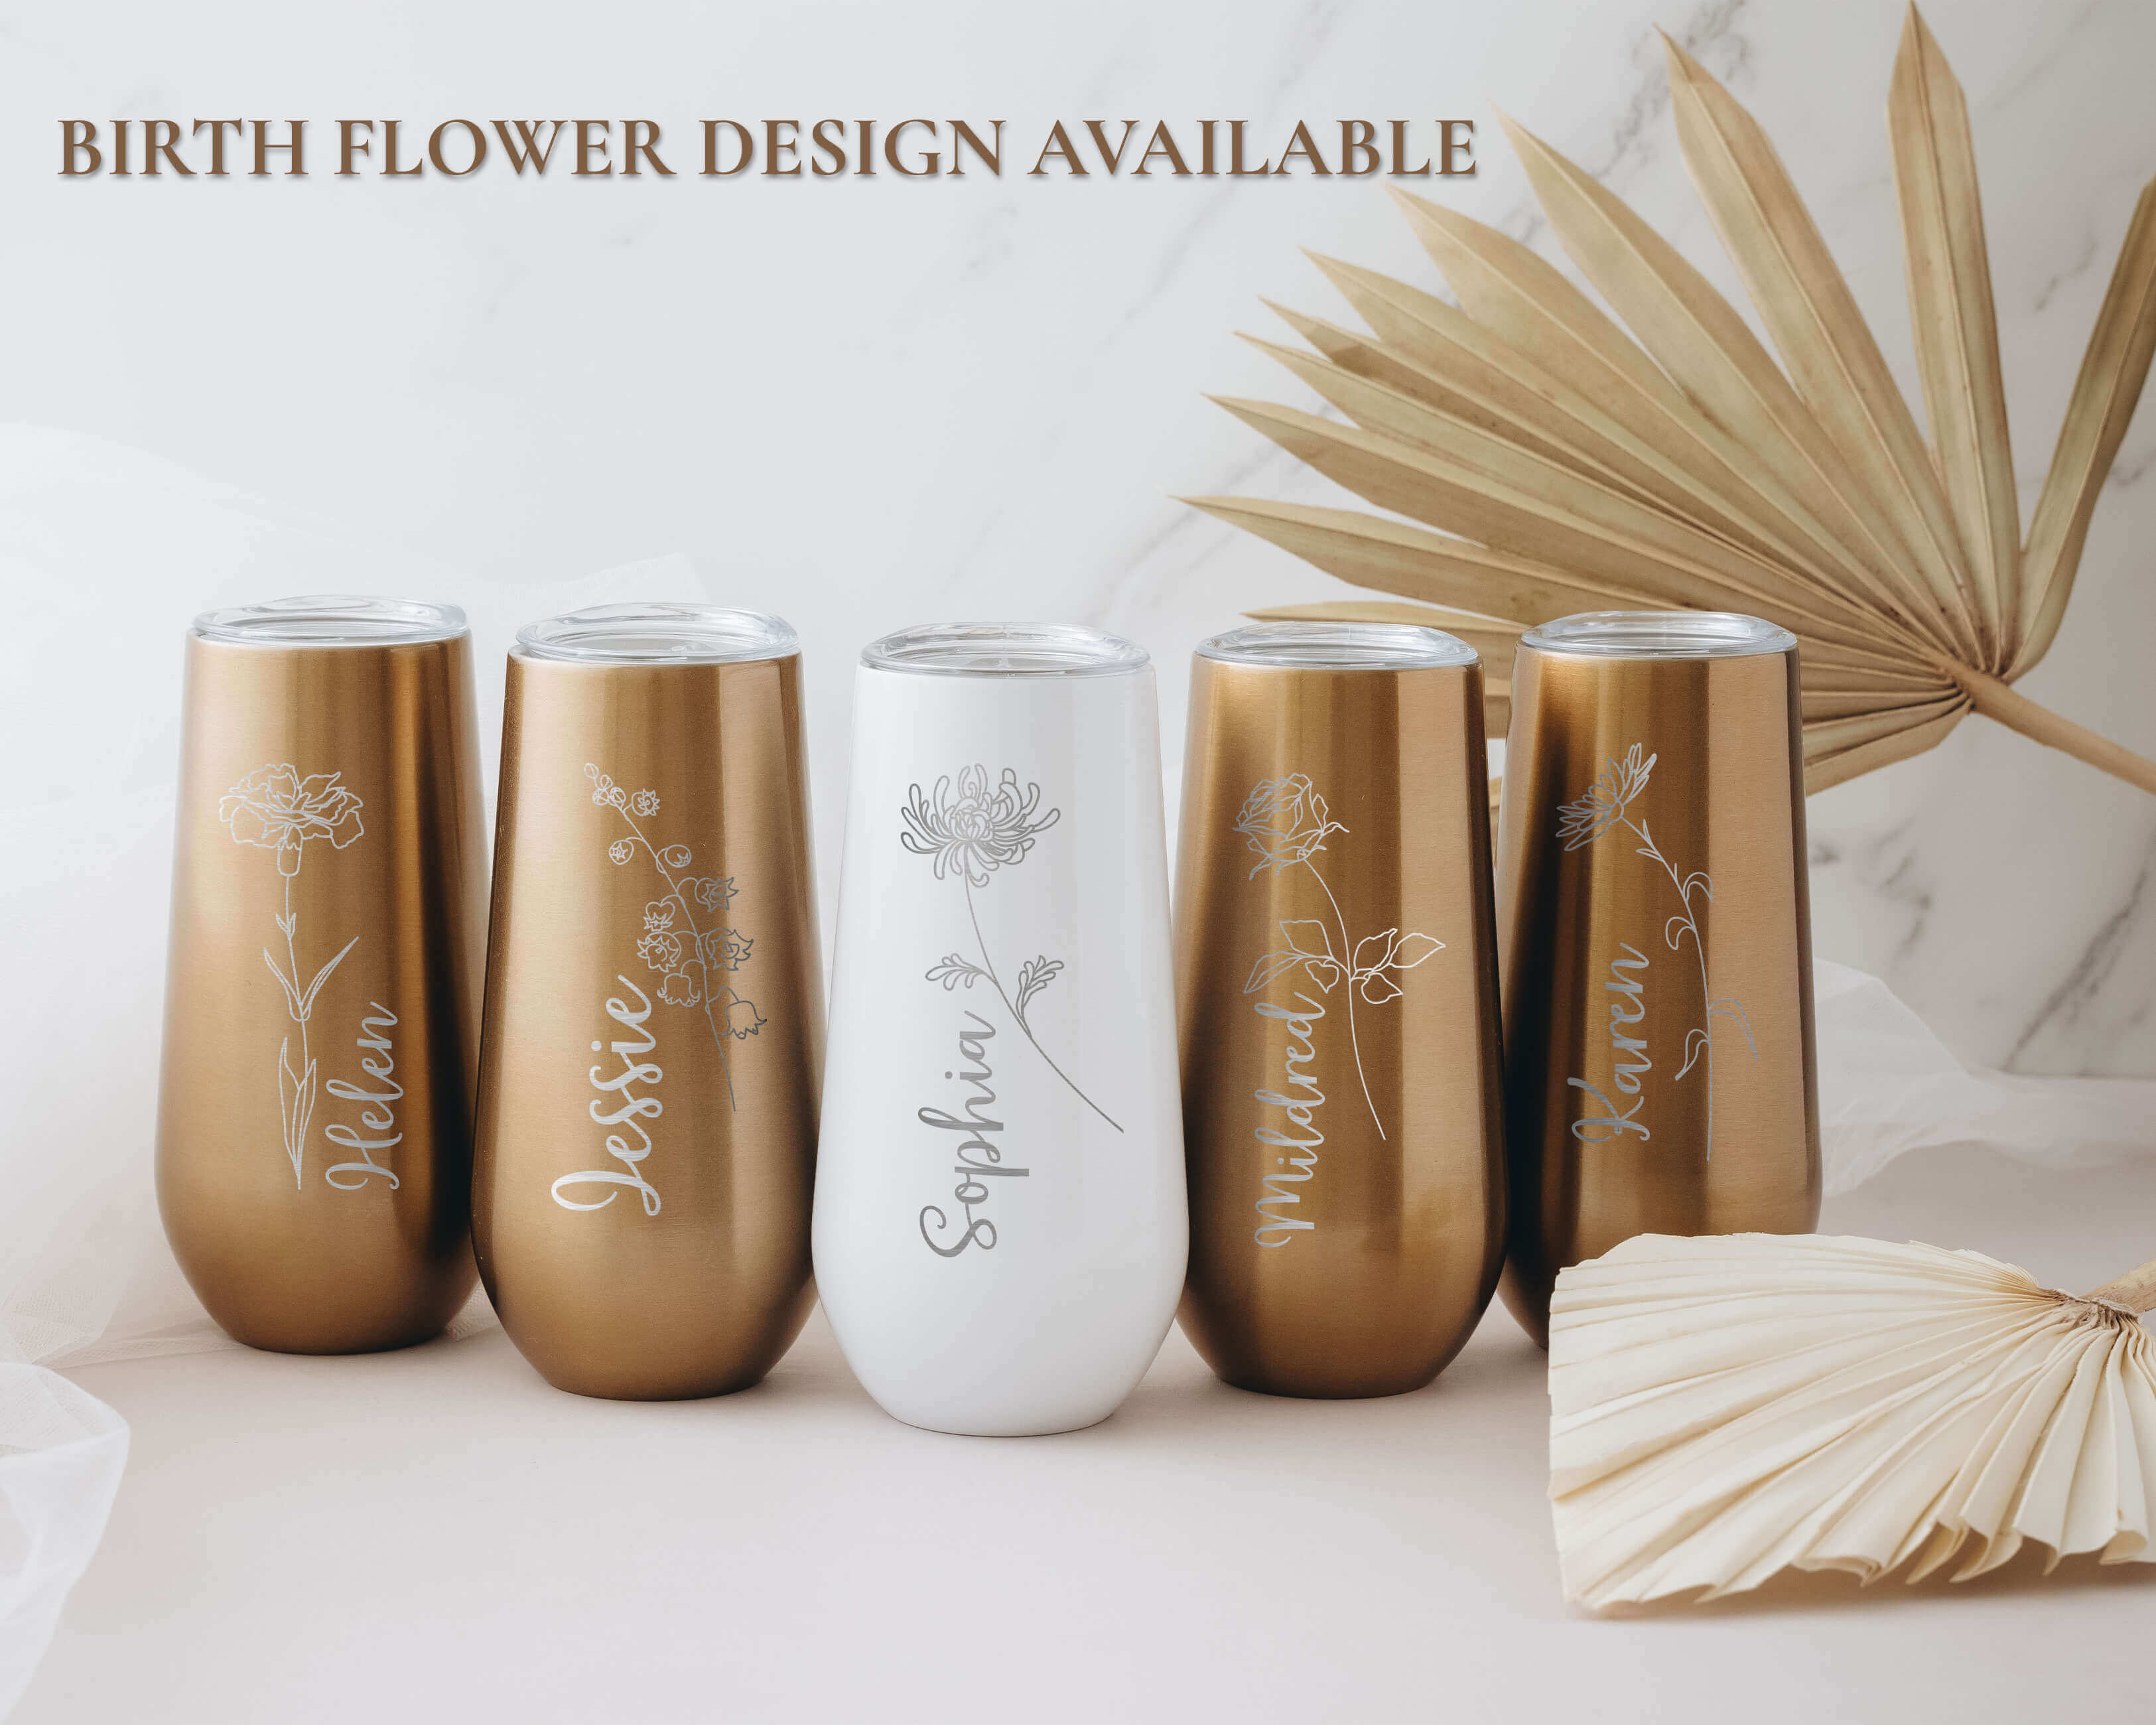 Bridesmaid Tumbler - Customize bridesmaid gifts with personalized gold and white bridesmaid tumblers, available in gold, black, silver, rose gold, and white colors. These tumblers feature their names, making them the perfect addition to any bridesmaid gif